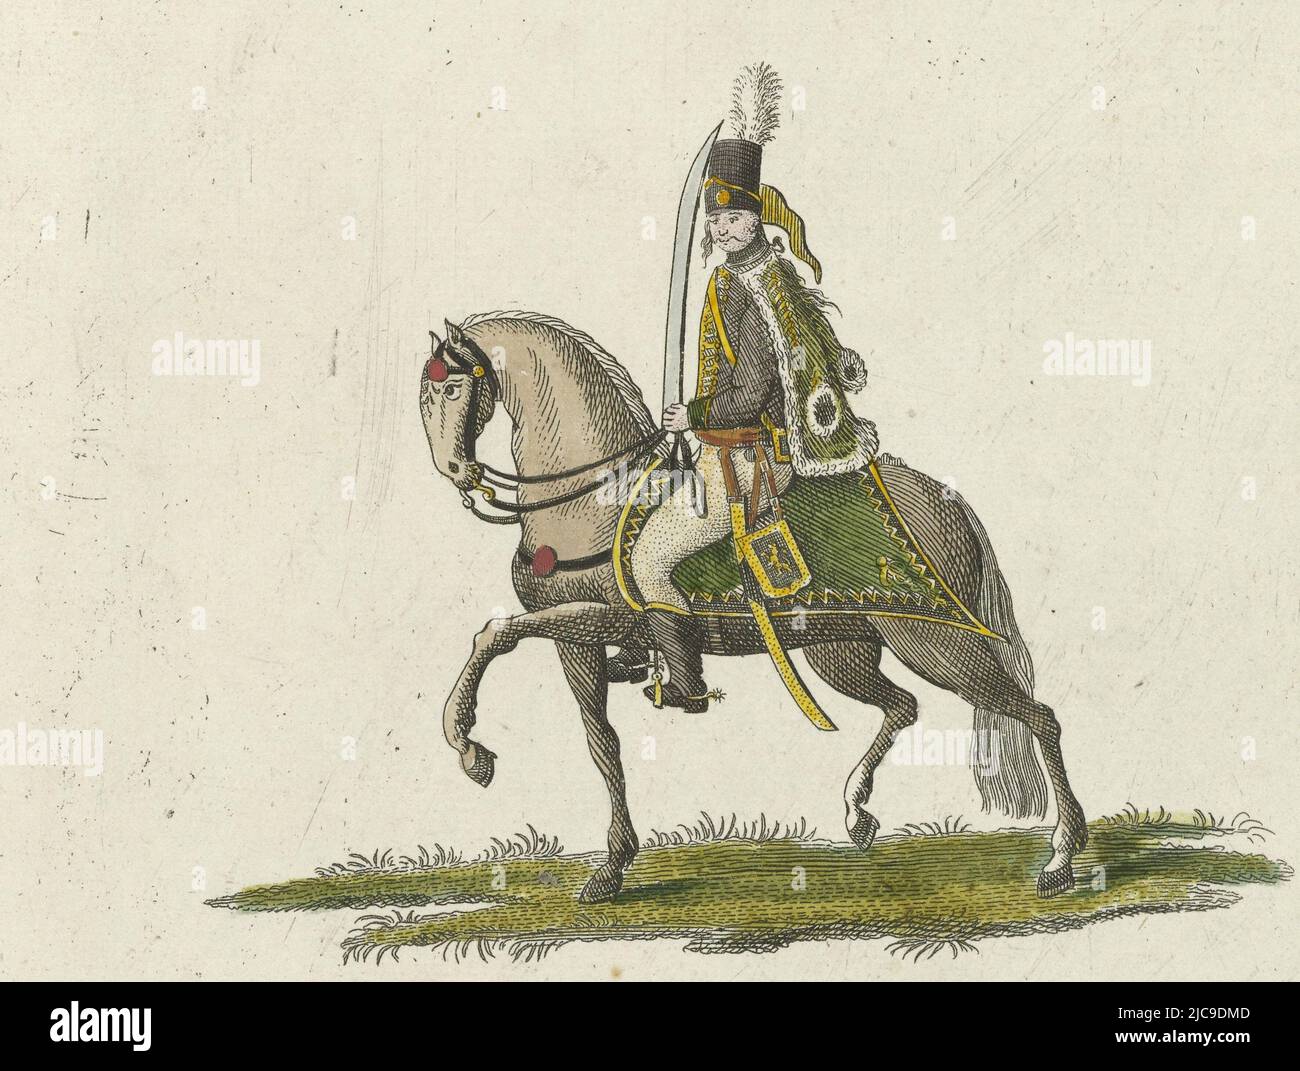 Hussar in uniform on horseback. Part of the series of prints of uniforms of the legion of Frederick III Rhine Count of Salm, in the service of the Republic in 1785, Hussar Hussar Officer Uniforms of the legion of the Rhine Count of Salm, 1785 Illustration of the uniforms of the legion of light troops of the highborn Lord Frederick of the Roman Empire, Rhine Count of Salm , print maker: anonymous, publisher: Arend Stubbe, Rijngraaf van Salm Frederik III, print maker: Northern Netherlands, publisher: Utrecht, 1785, paper, etching, h 145 mm × w 195 mm Stock Photo